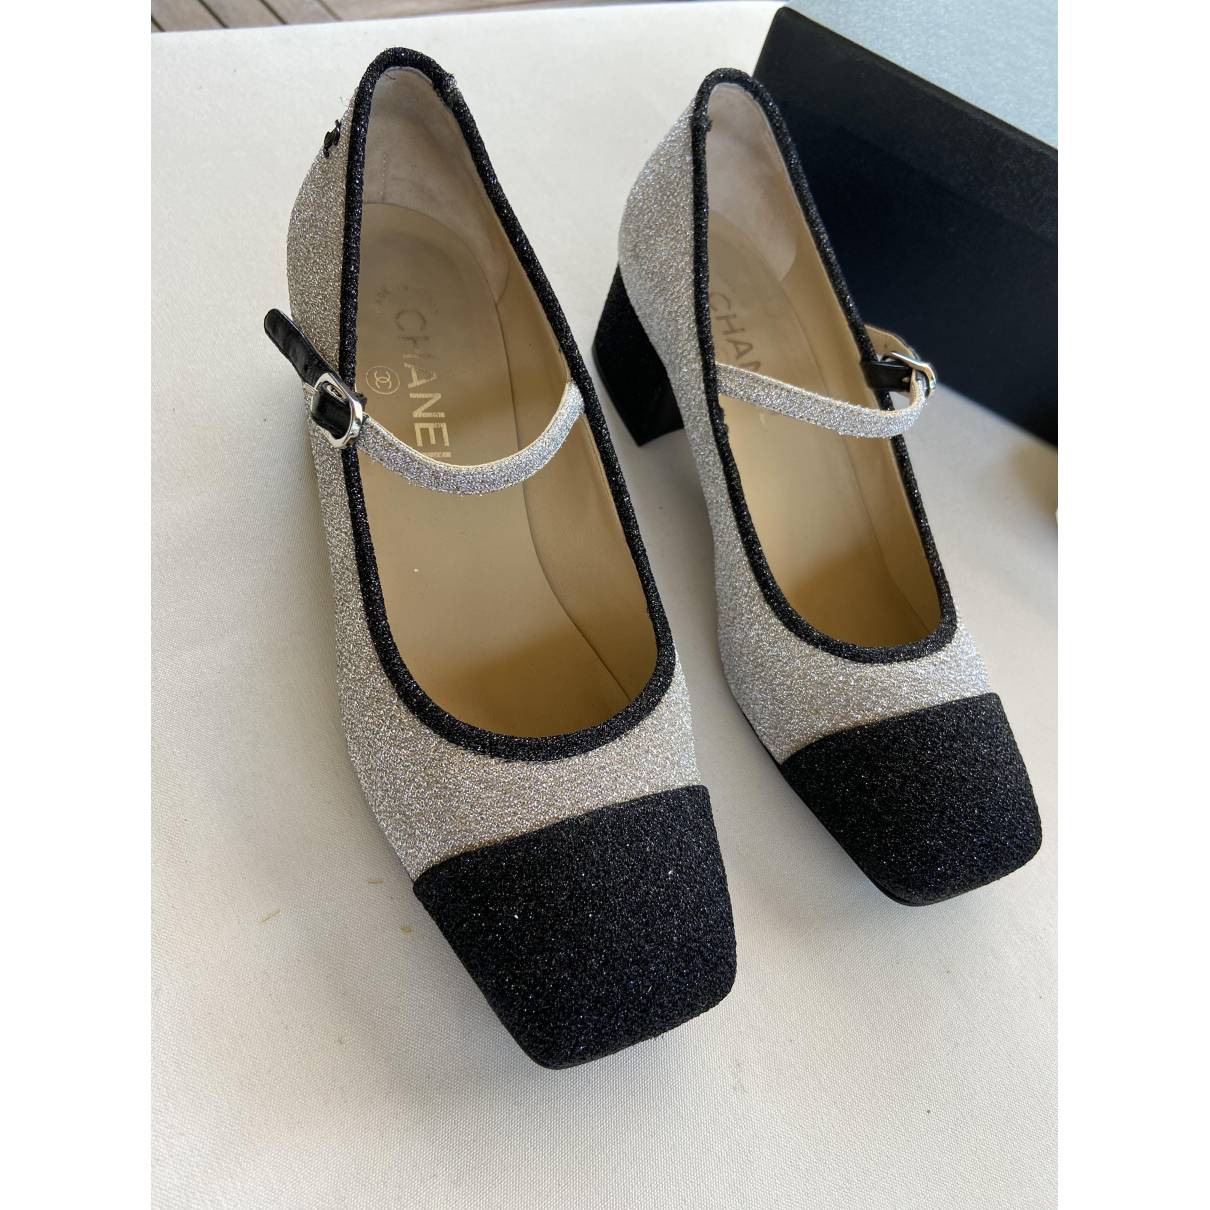 Chanel Slingback Shoes Size 38 Black and Silver Leather - ASL1665